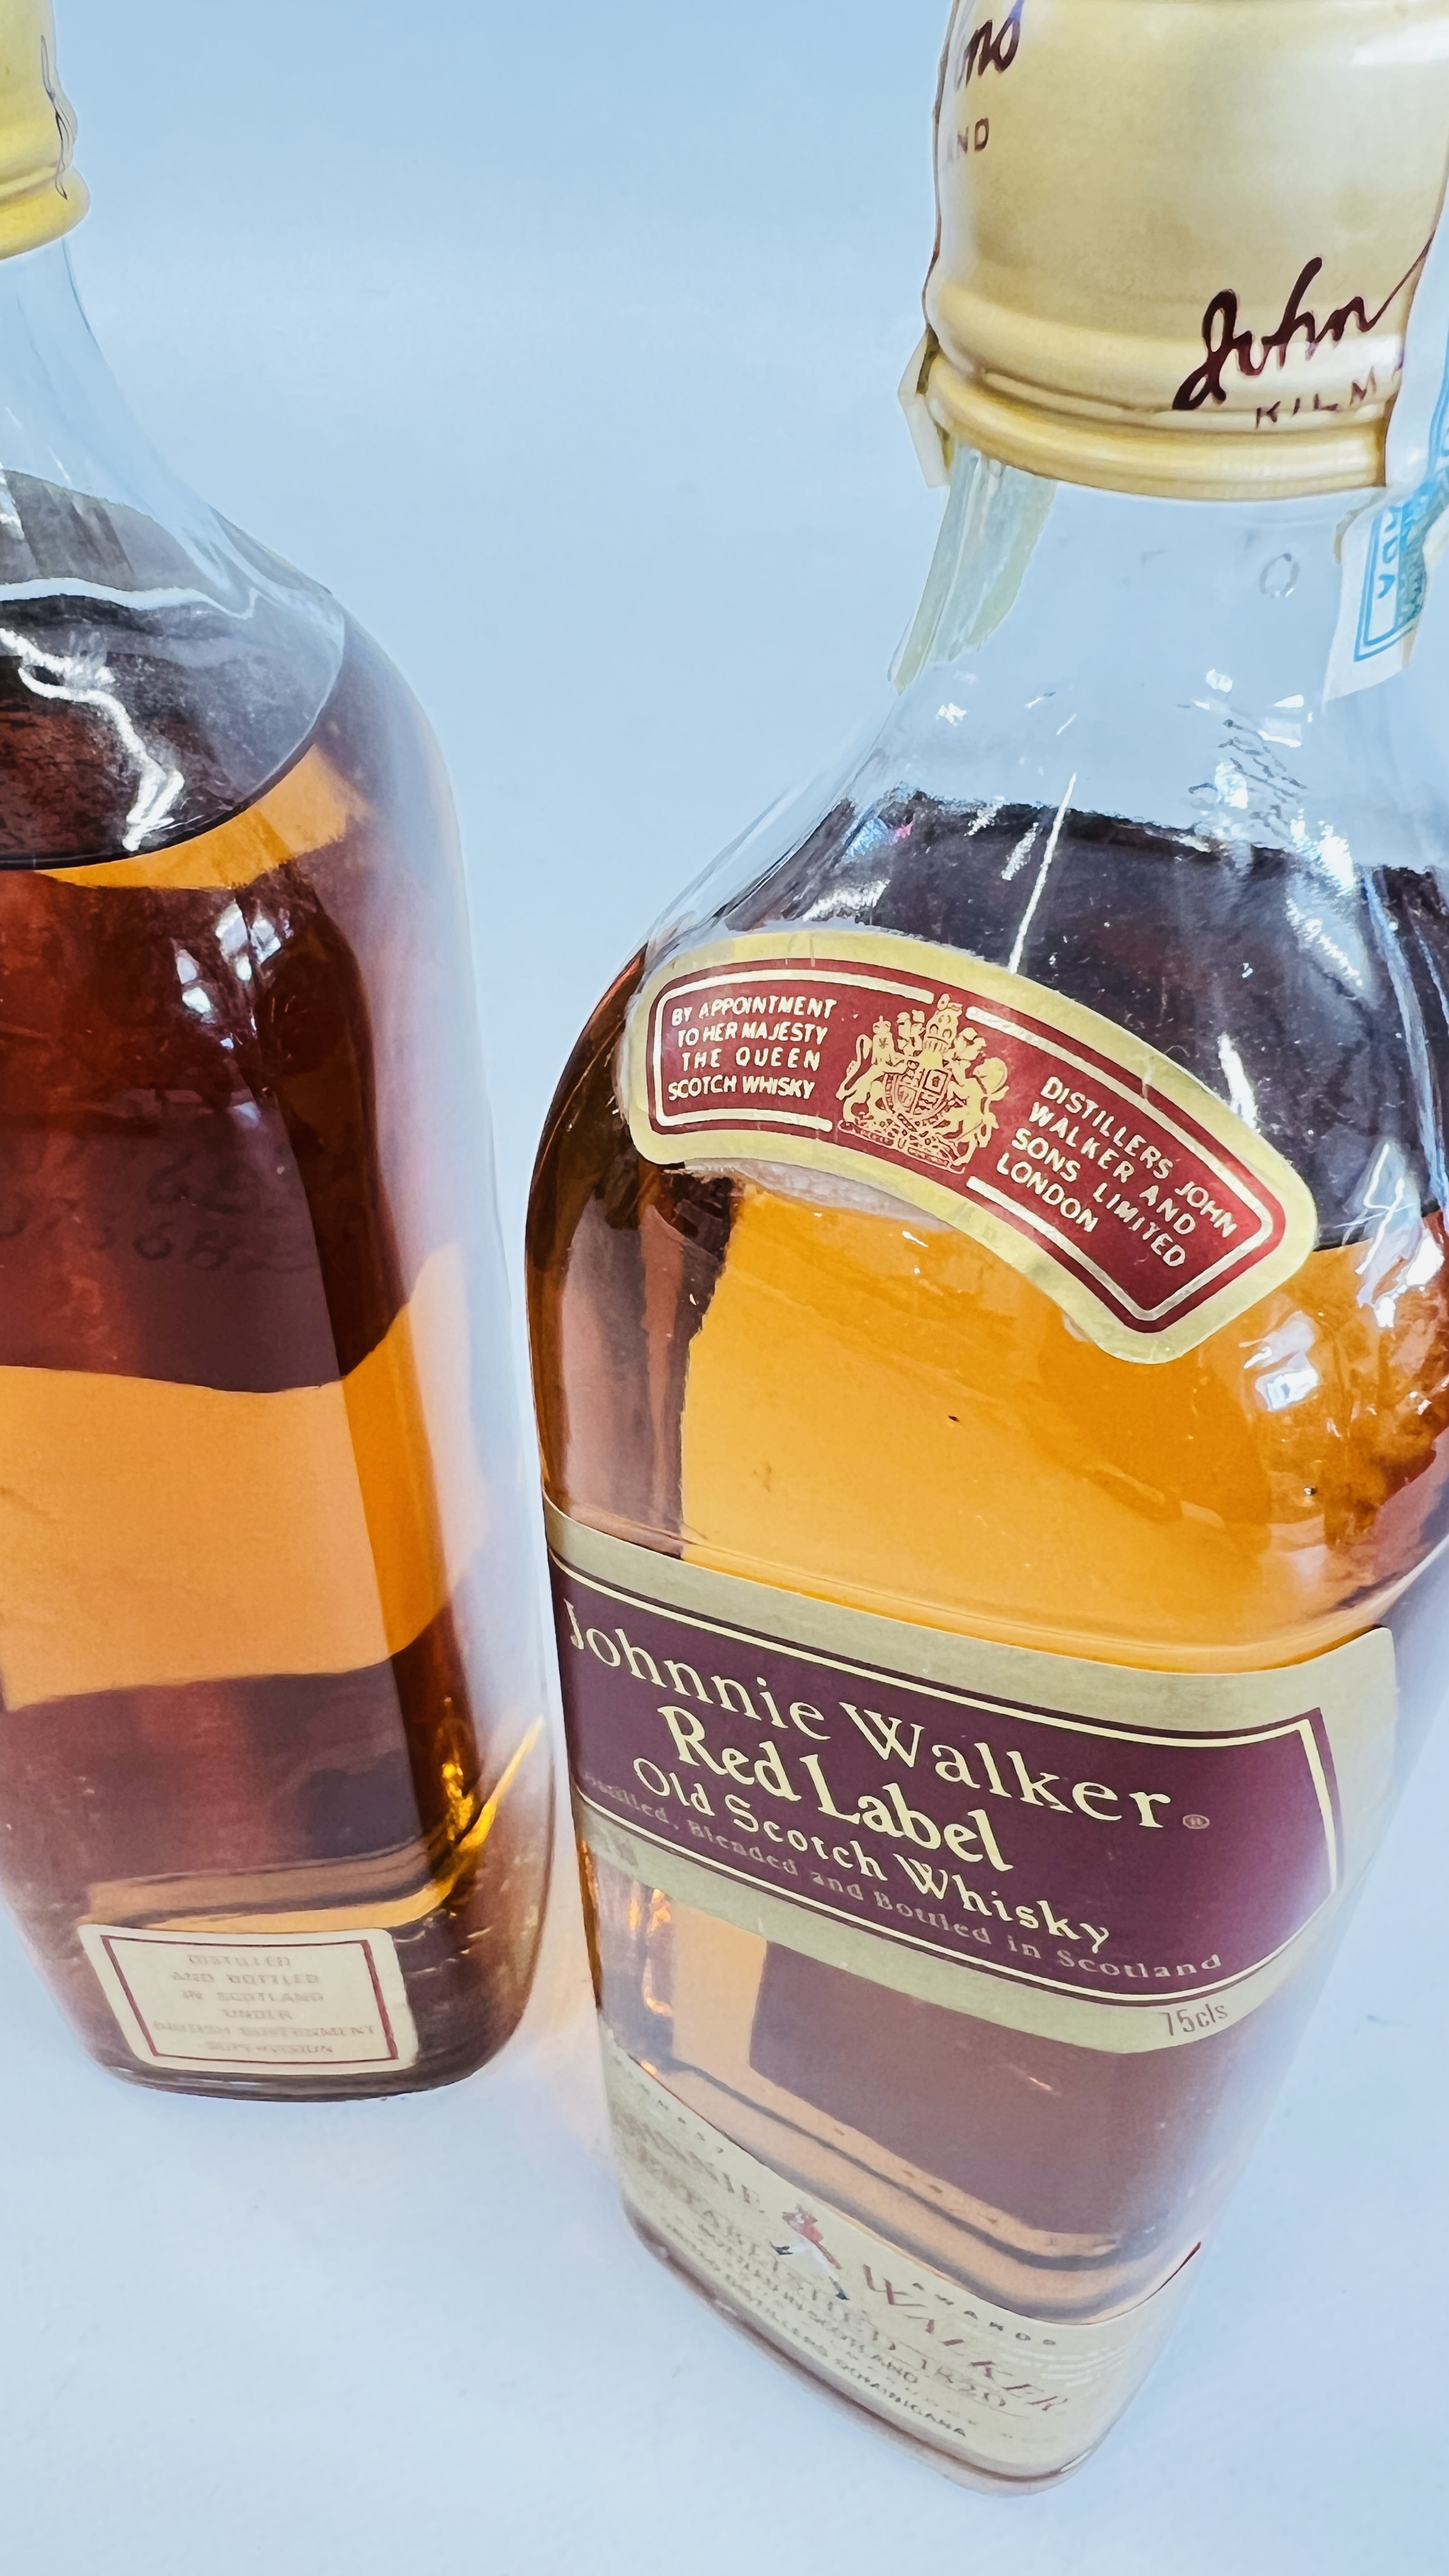 2 X 75CL BOTTLES OF "JOHNNIE WALKER" RED LABEL OLD SCOTCH WHISKY. - Image 3 of 4